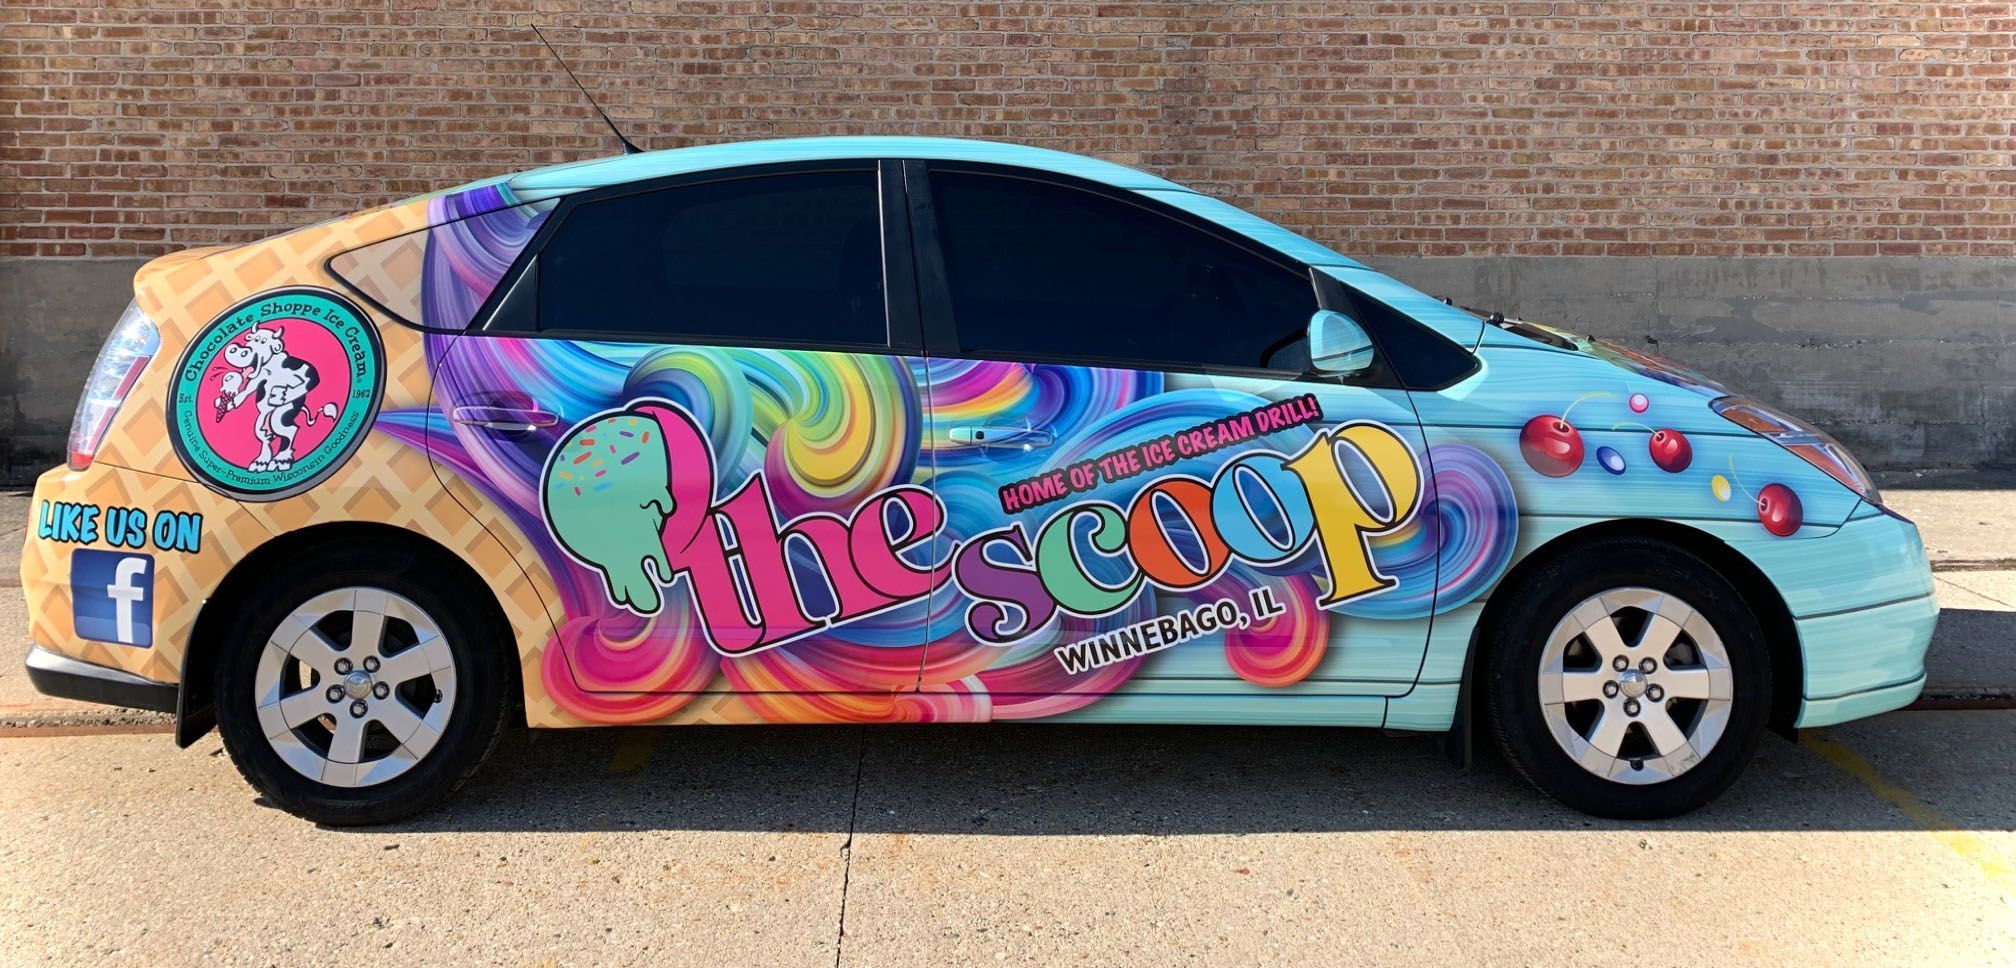 A small car that has been colorfully wrapped with graphics promoting an ice cream business called "The Scoop"